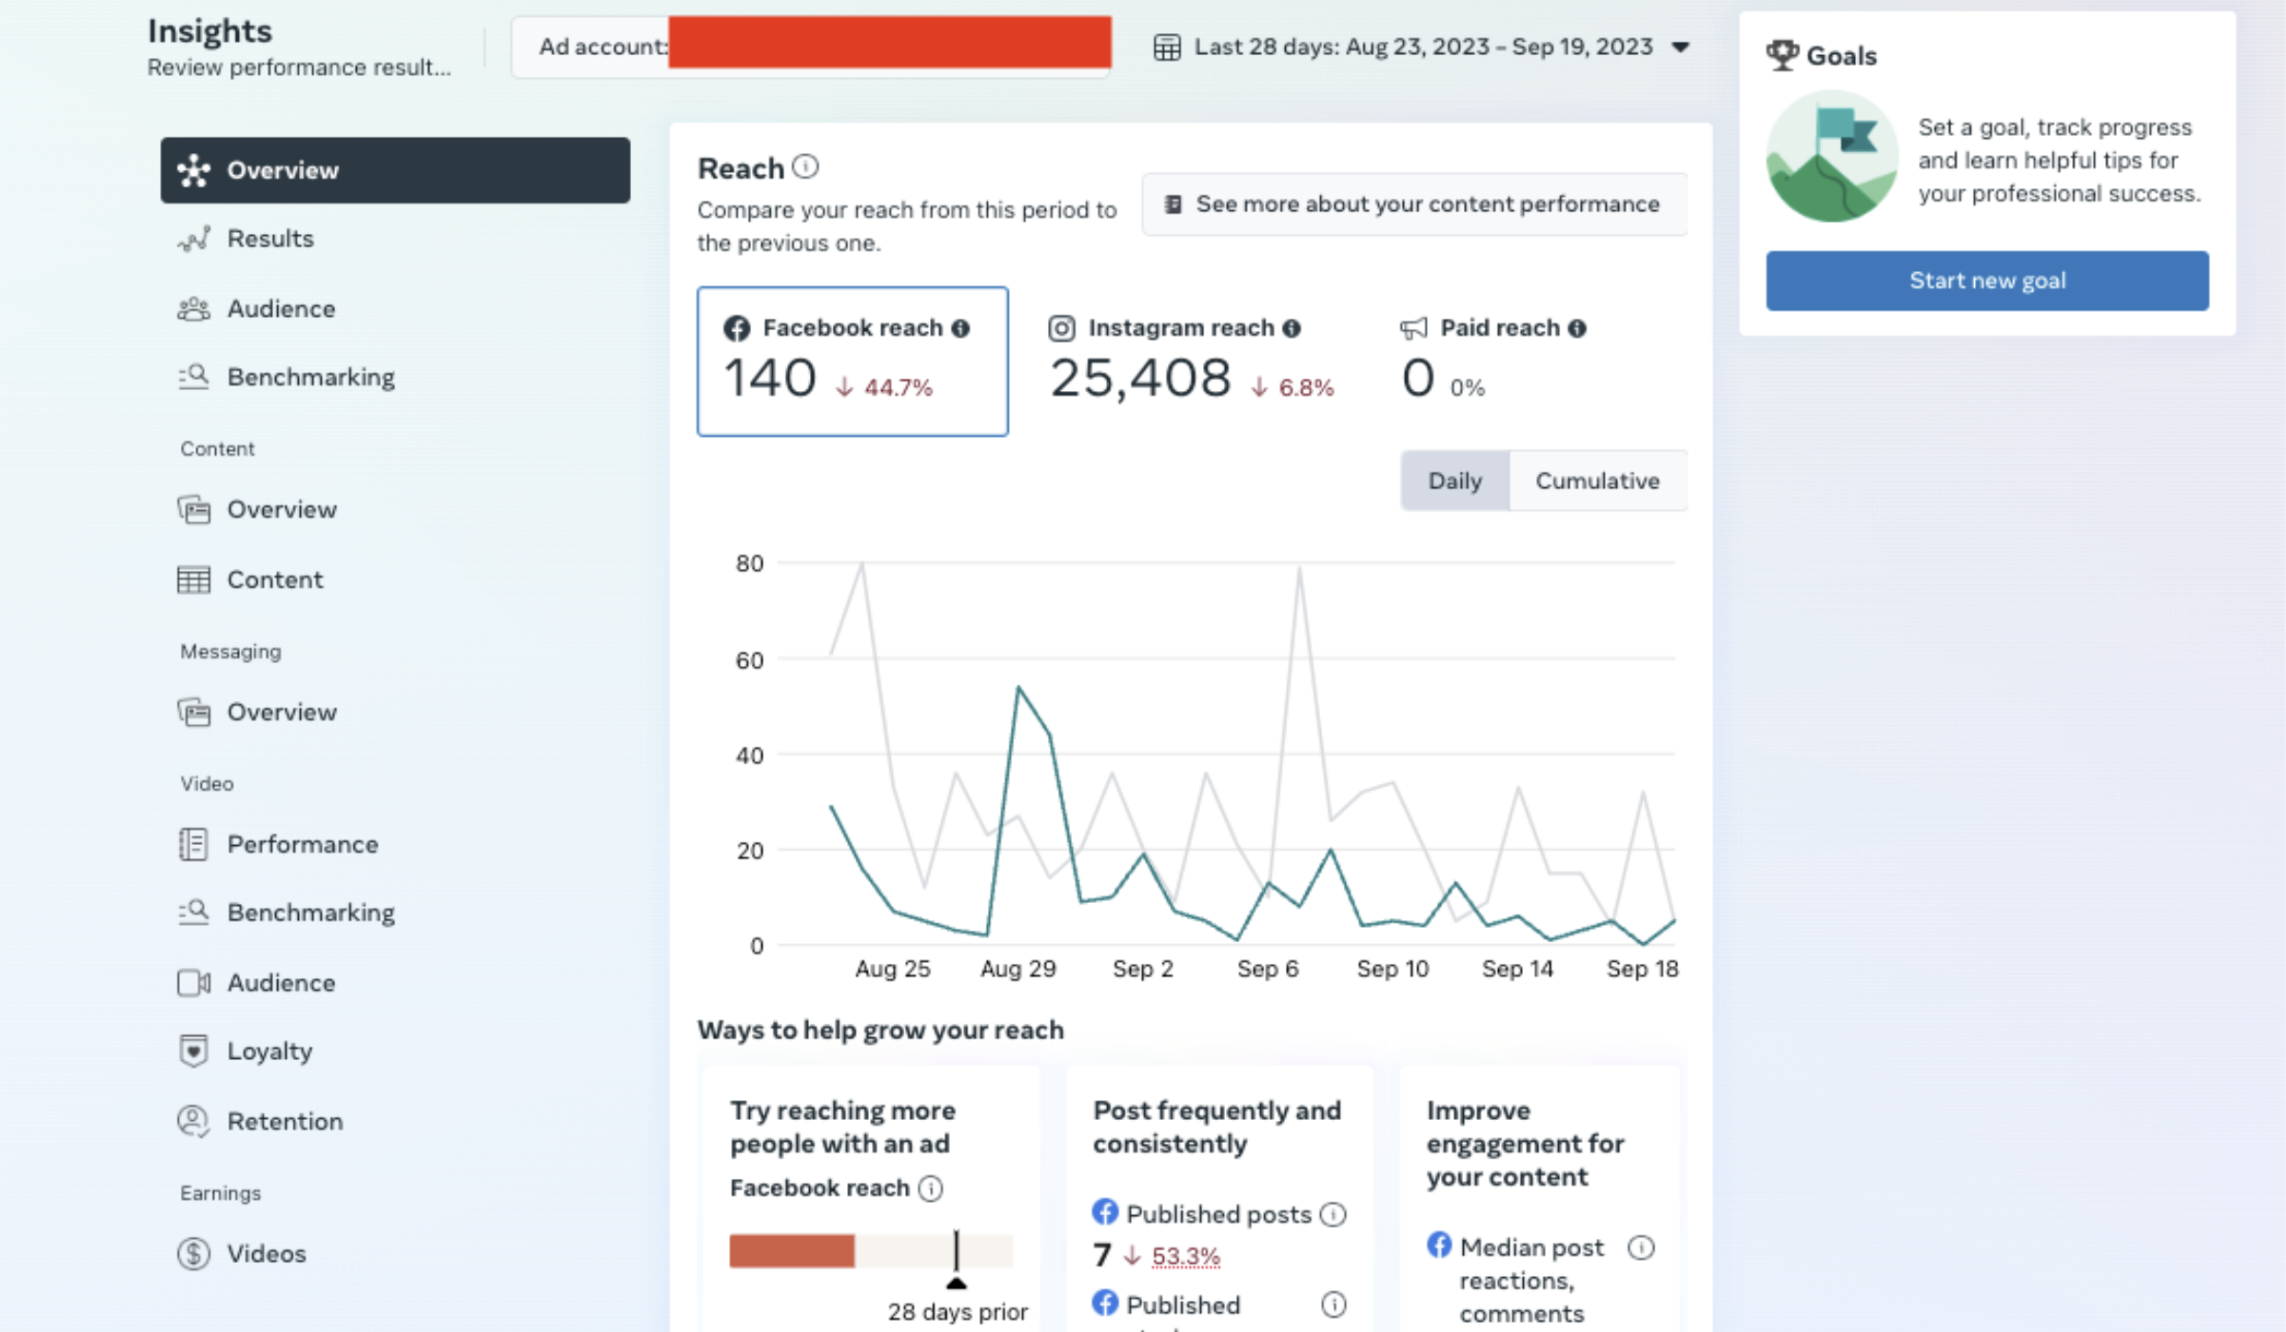 Preview of the Insights feature in Creator Studio. The image shows the Insights page with tabs such as overview, results, audience, benchmarking and data such as Facebook reach, Instagram reach and paid reach,